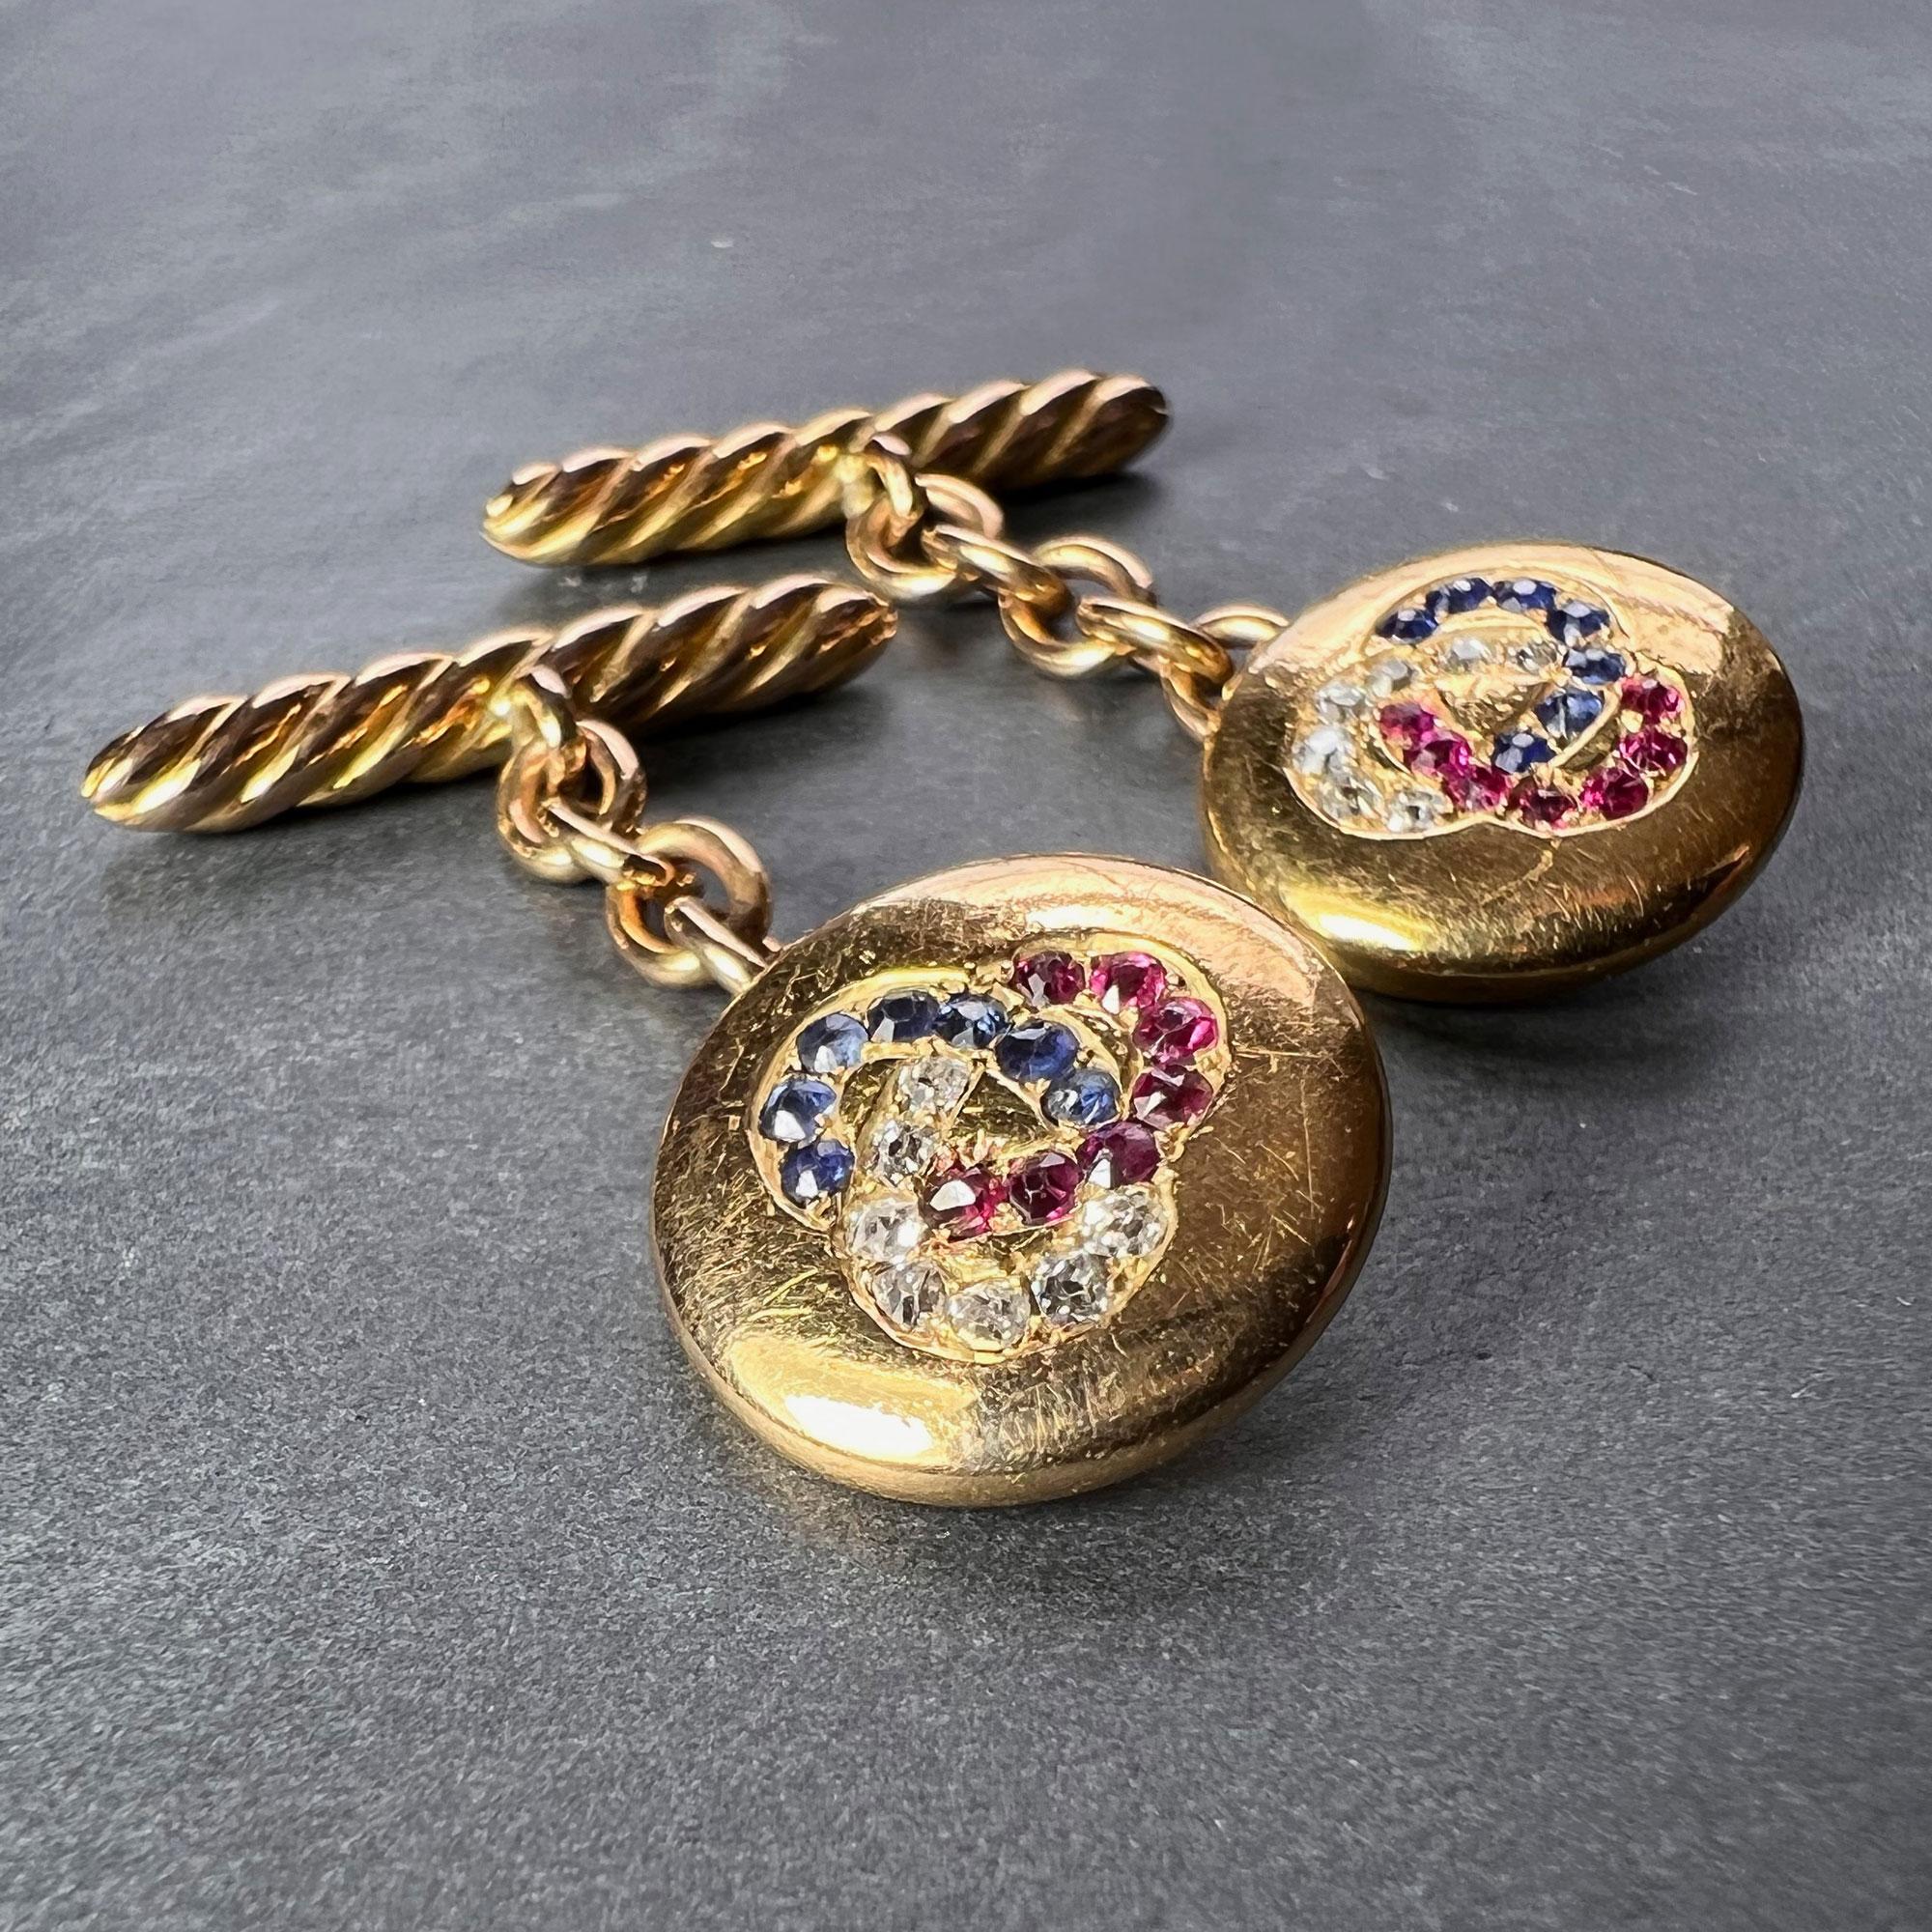 A pair of 14 karat (14K) yellow gold cufflinks each set with a trefoil of seven old or single cut rubies, diamonds and sapphires. Stamped 585 for 14K gold to the reverse. Possibly Russian origin. 

Total gem weights: approximately 0.42 carats